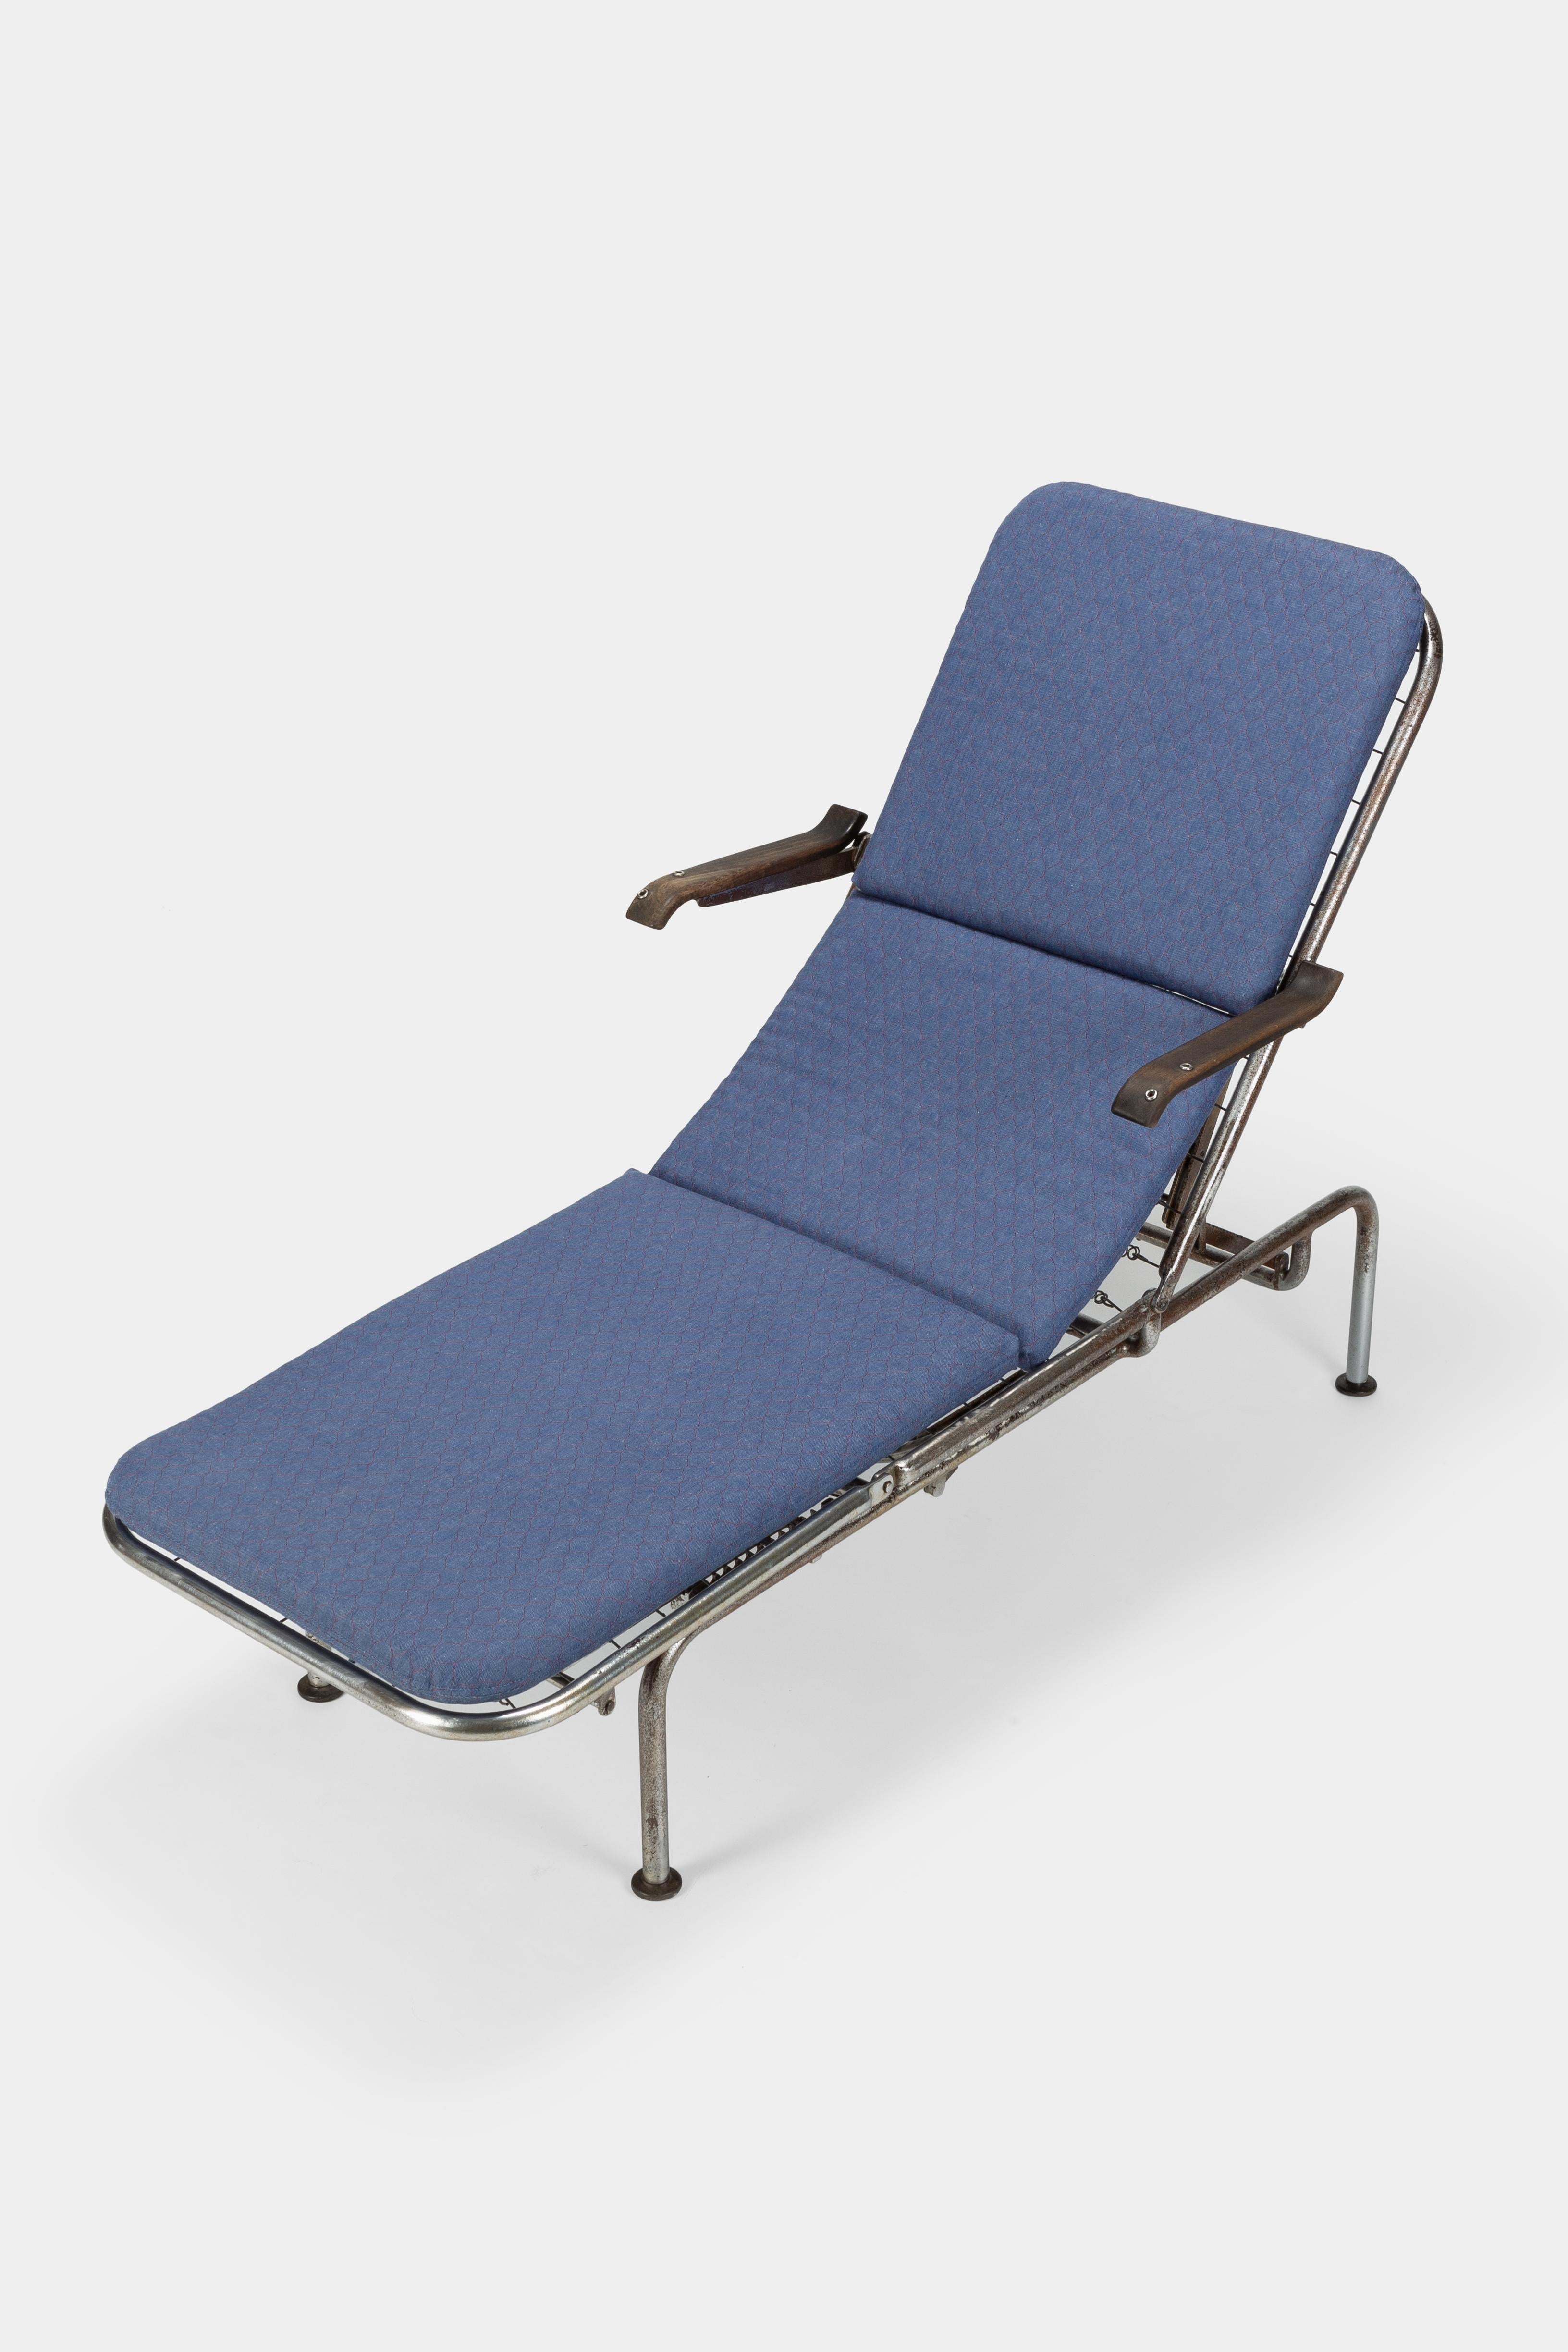 Lounger manufactured in the 1930s in Switzerland. Varied adjustable lounger. The corroded steel tube frame was cleaned and lacquered. The newly prepared, customized cushions are covered with a blue cotton fabric. The patina was covered with lacquer